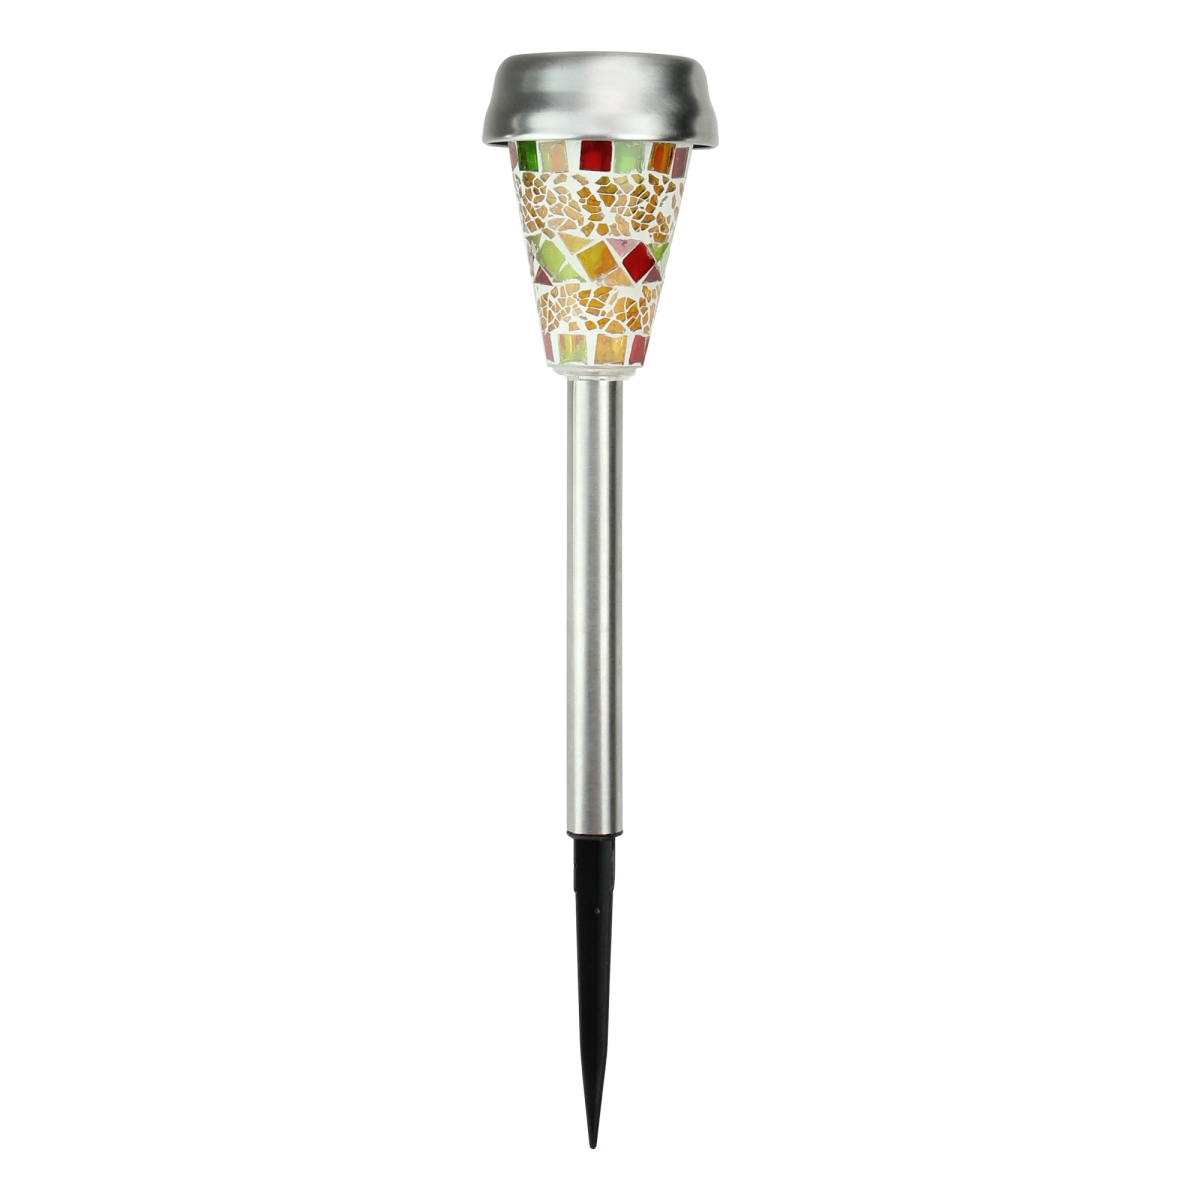 32815998 9.75 In. Yellow Mosaic Solar Light With White Led Light & Lawn Stake